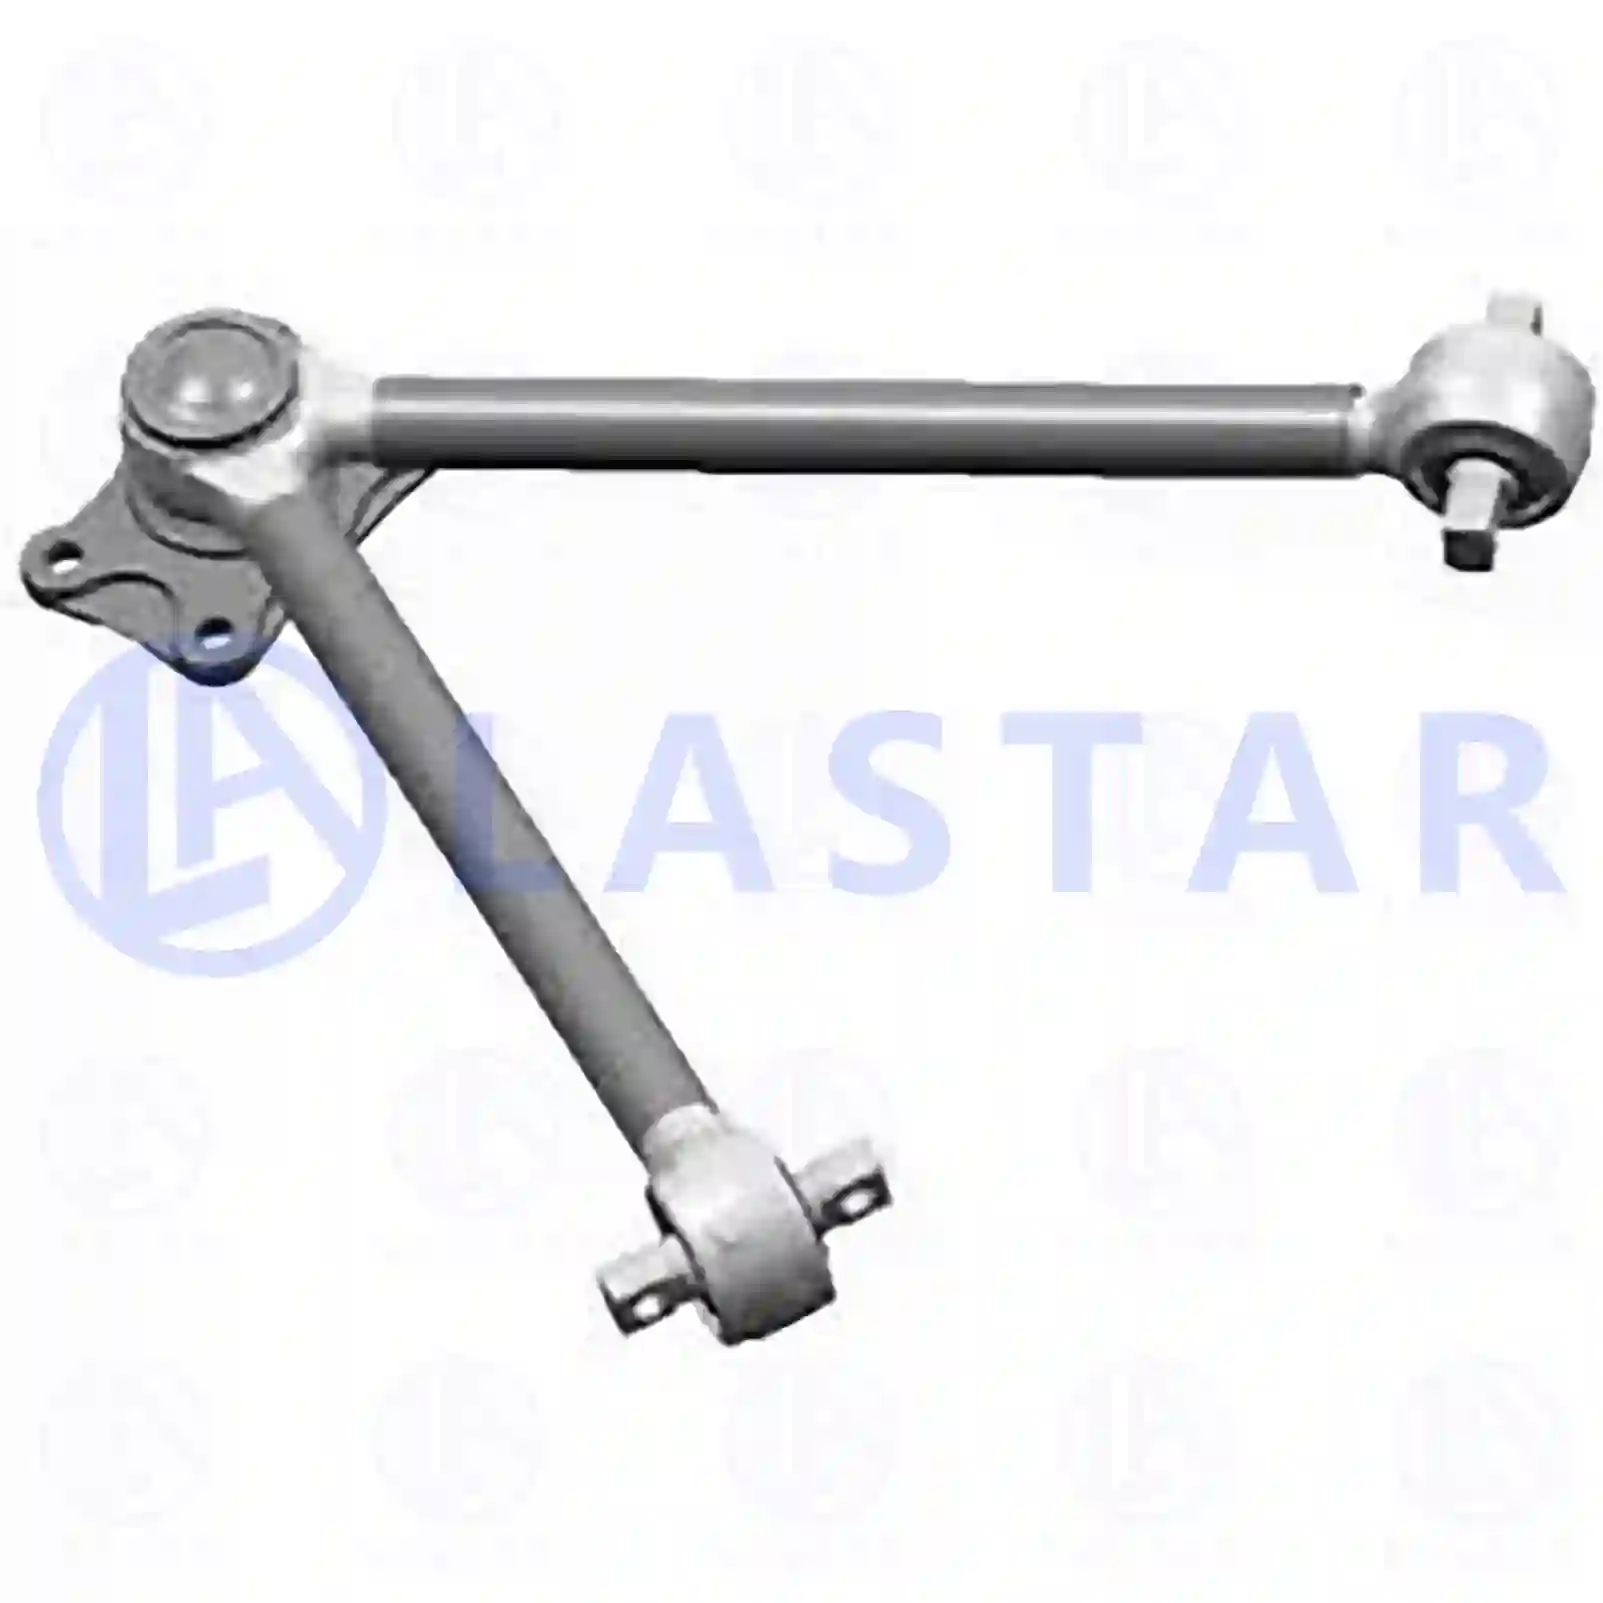 V-stay, 77729620, 1576953, , ||  77729620 Lastar Spare Part | Truck Spare Parts, Auotomotive Spare Parts V-stay, 77729620, 1576953, , ||  77729620 Lastar Spare Part | Truck Spare Parts, Auotomotive Spare Parts